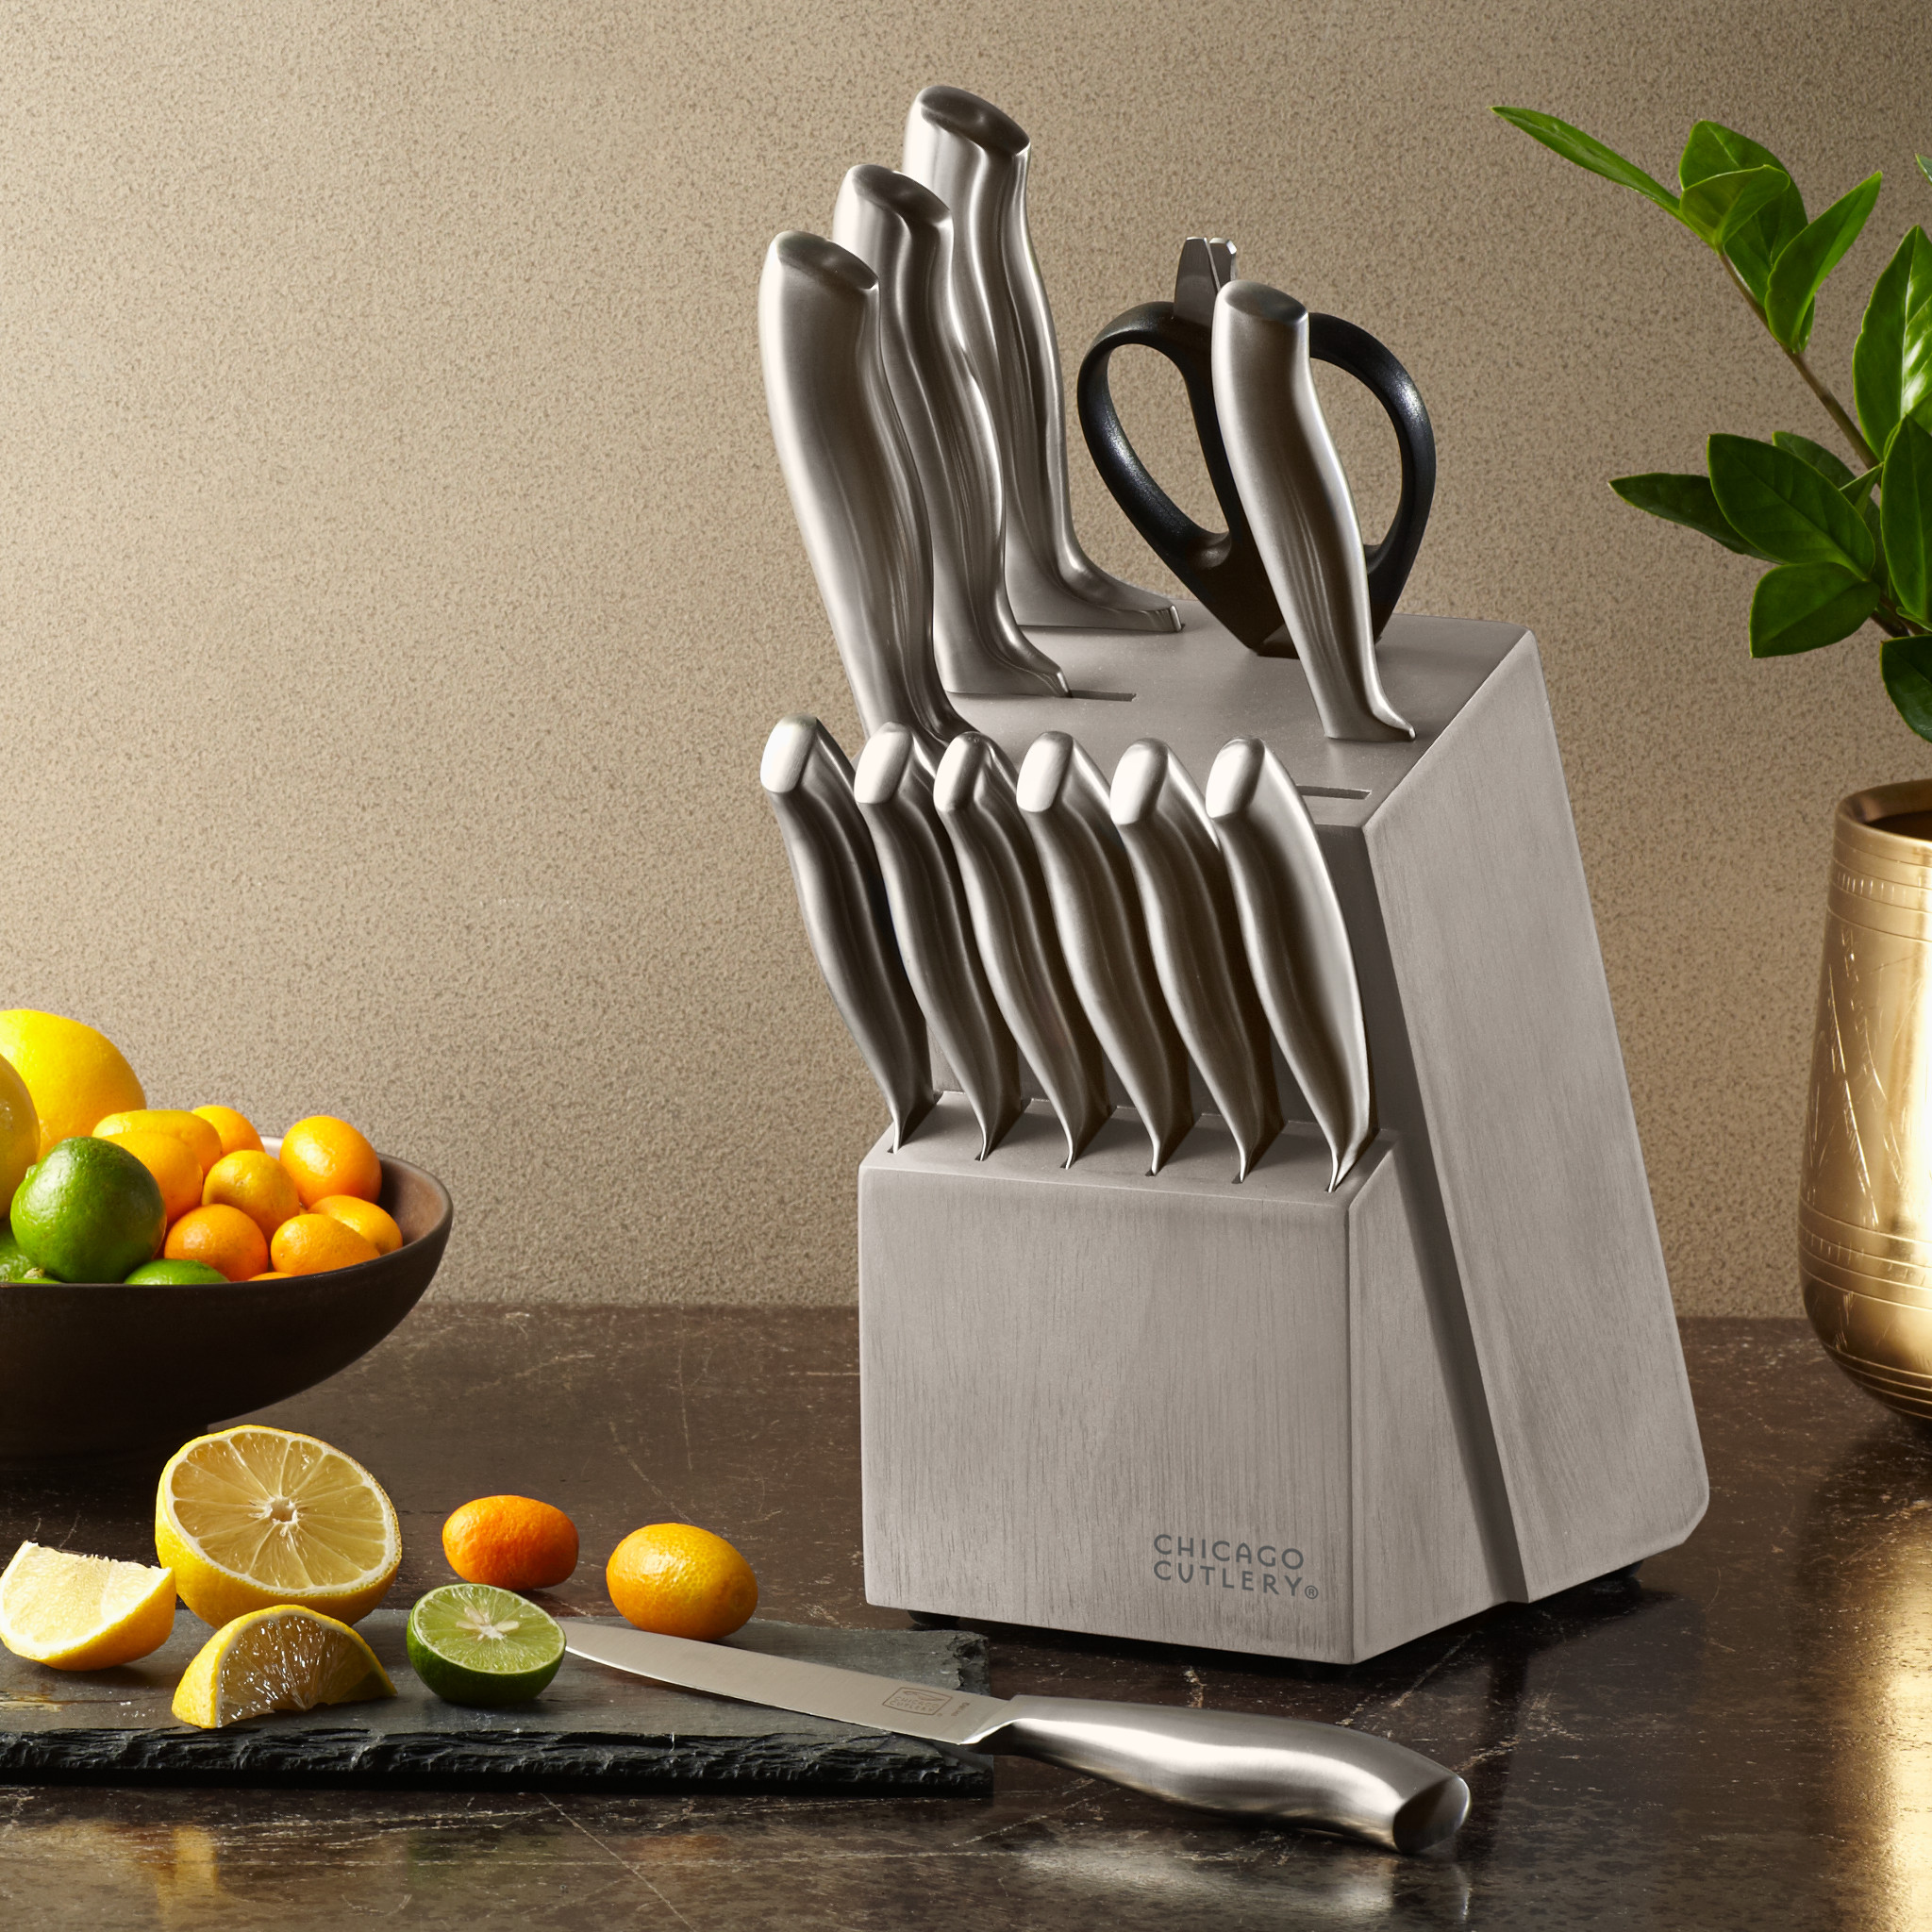 Chicago Cutlery Fusion 17 Piece Knife Block Set